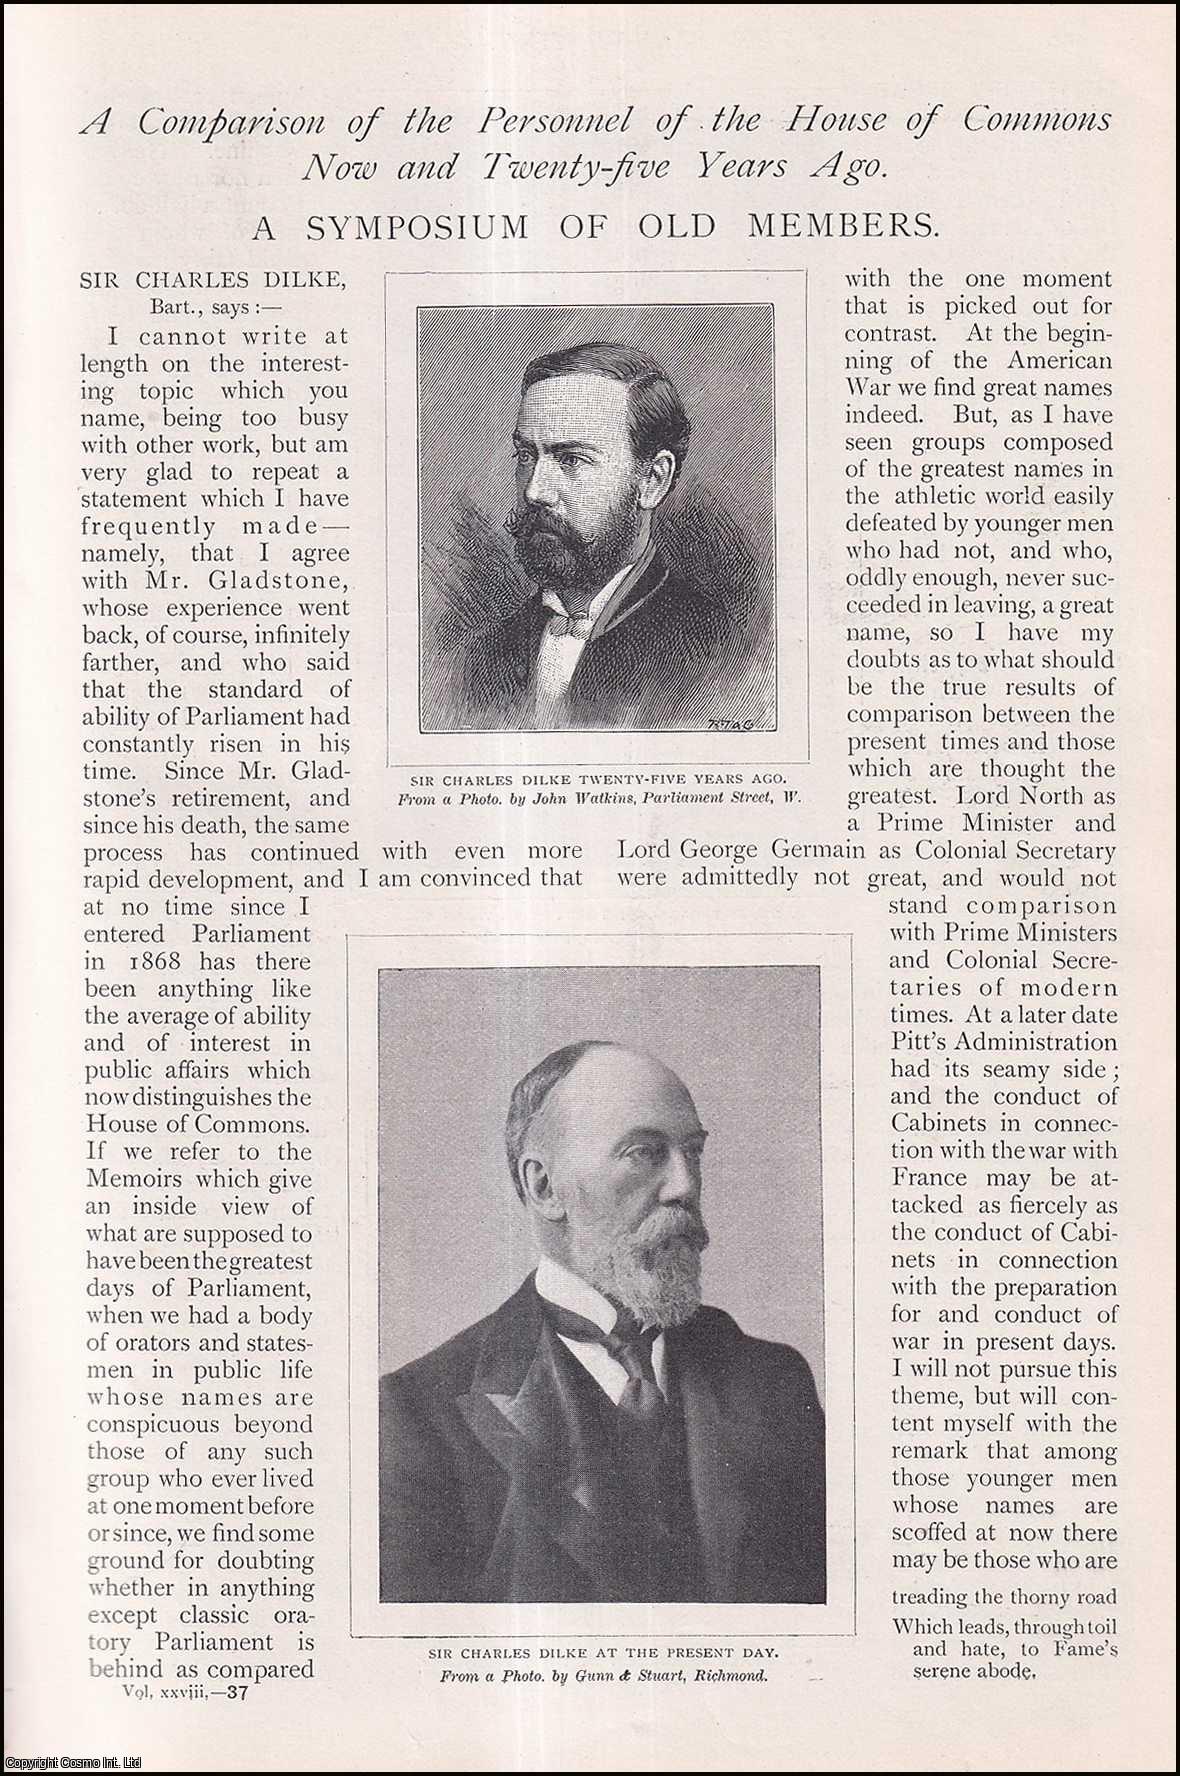 --- - A Comparison of The Personnel of The House of Commons Now and Twenty-Five Years Ago. A Symposium of Old Members. A rare original article from The Strand Magazine, 1904.